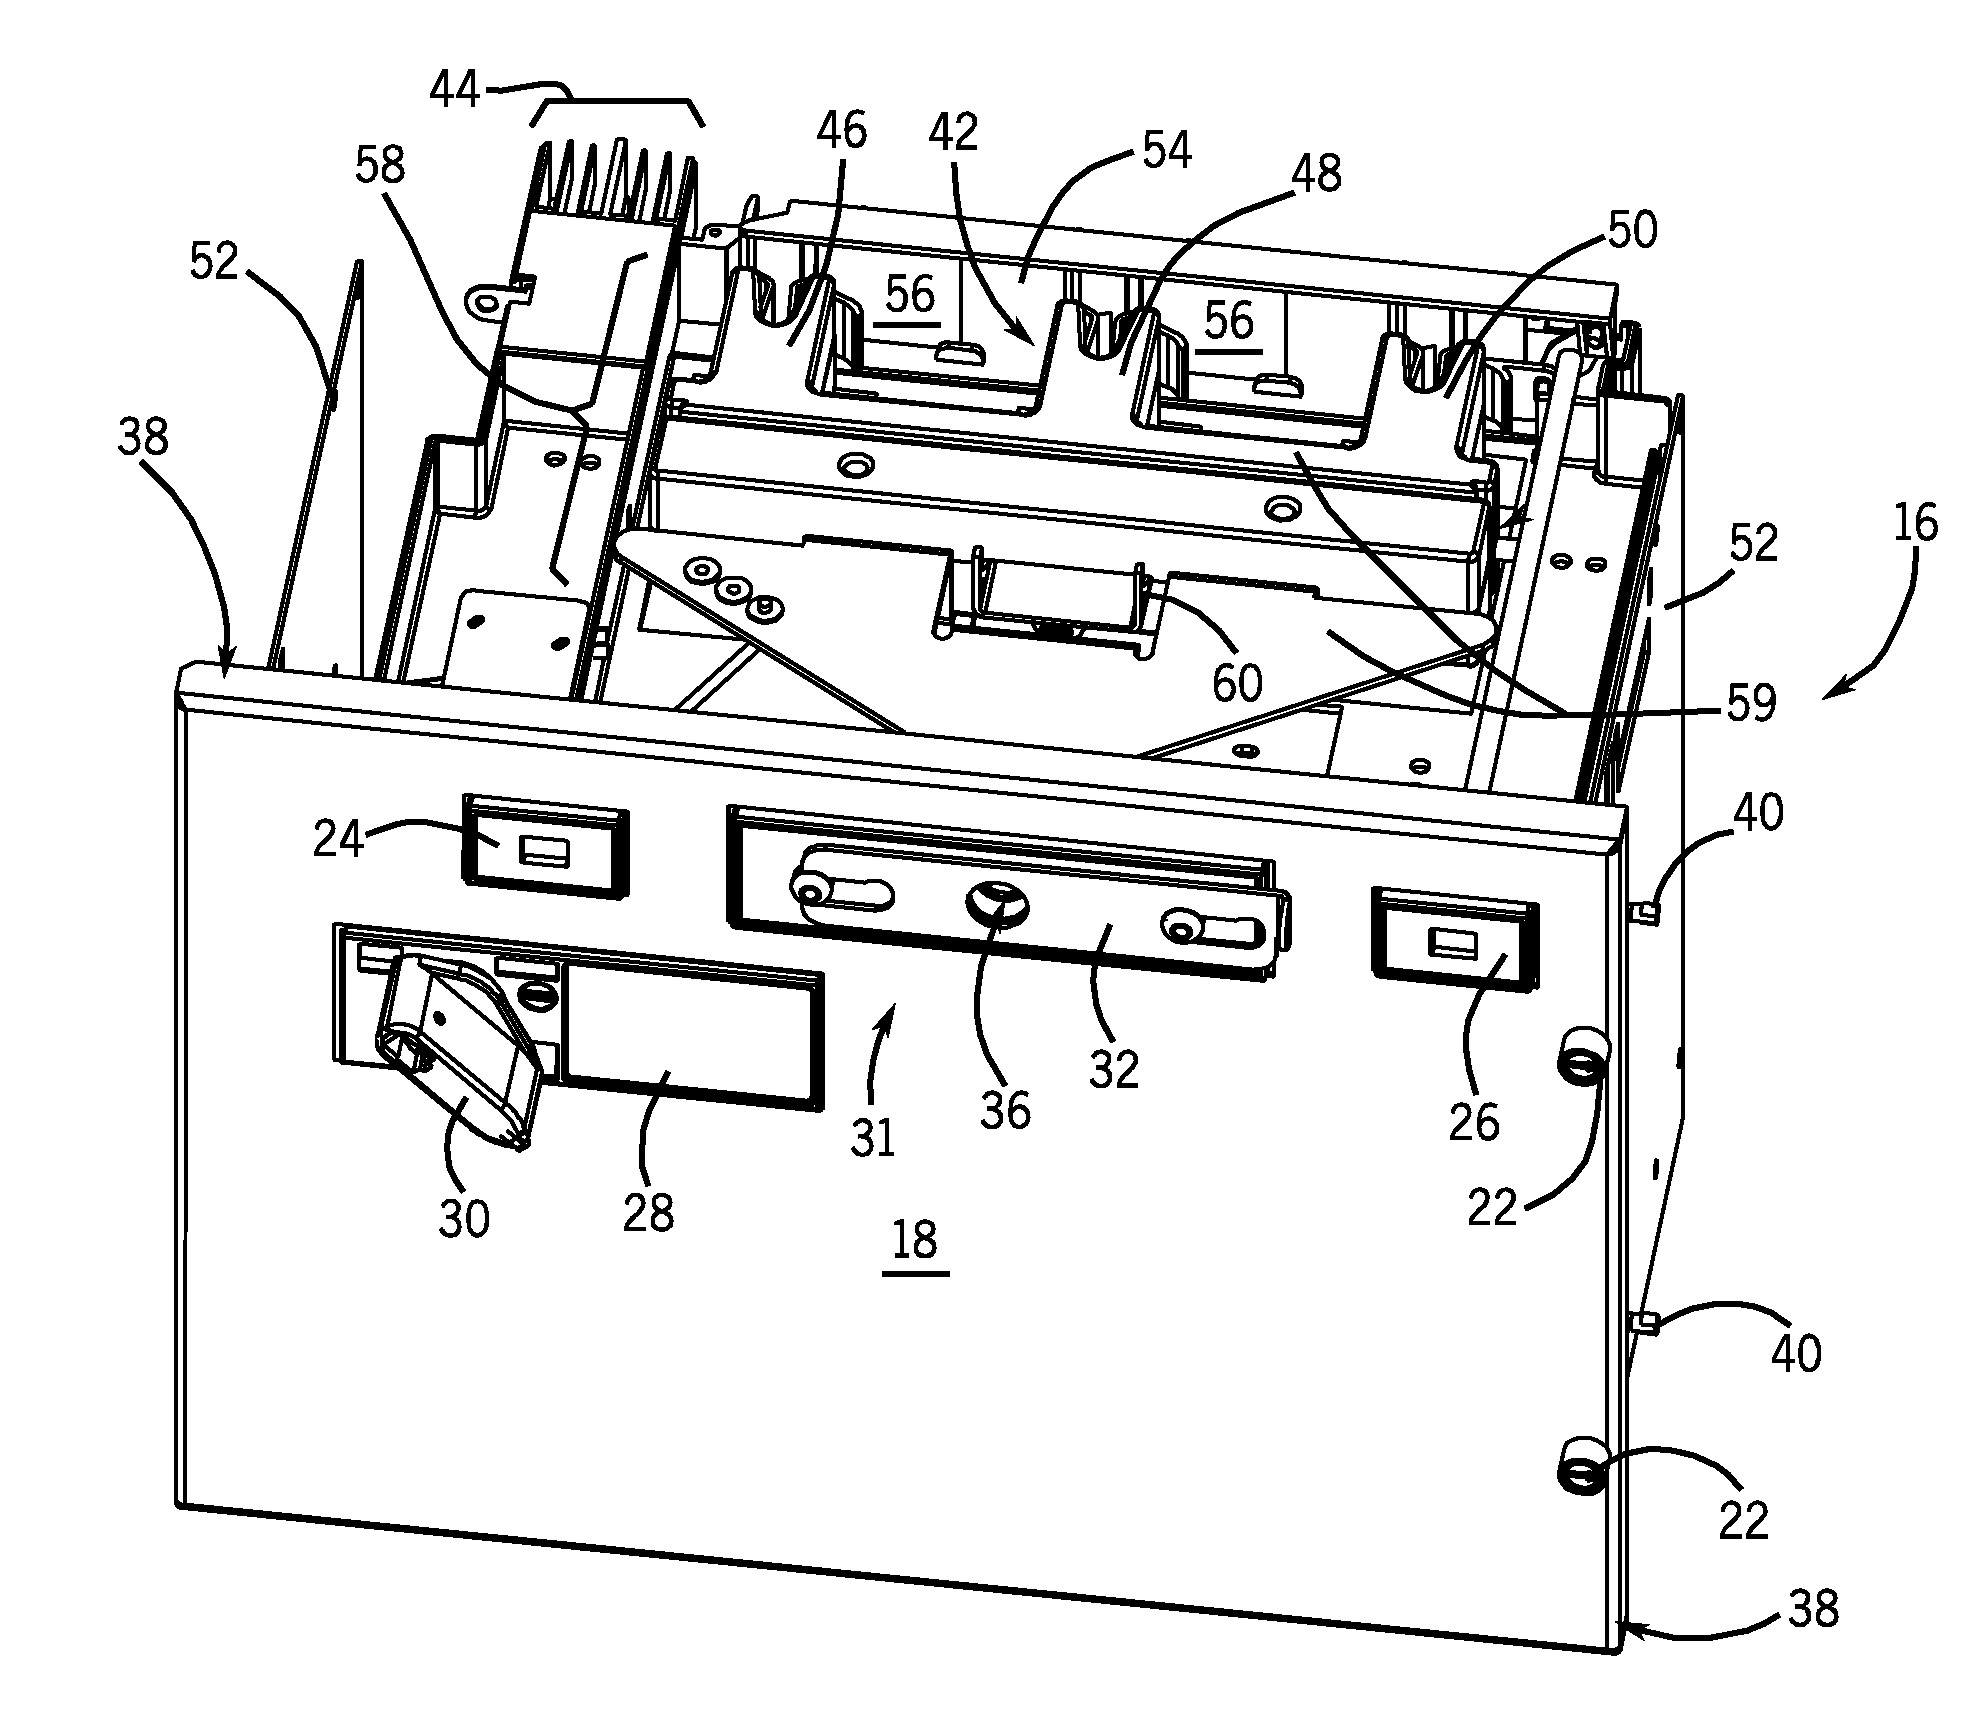 Coordinating installation and connection of a motor control center subunit having moveable line contacts